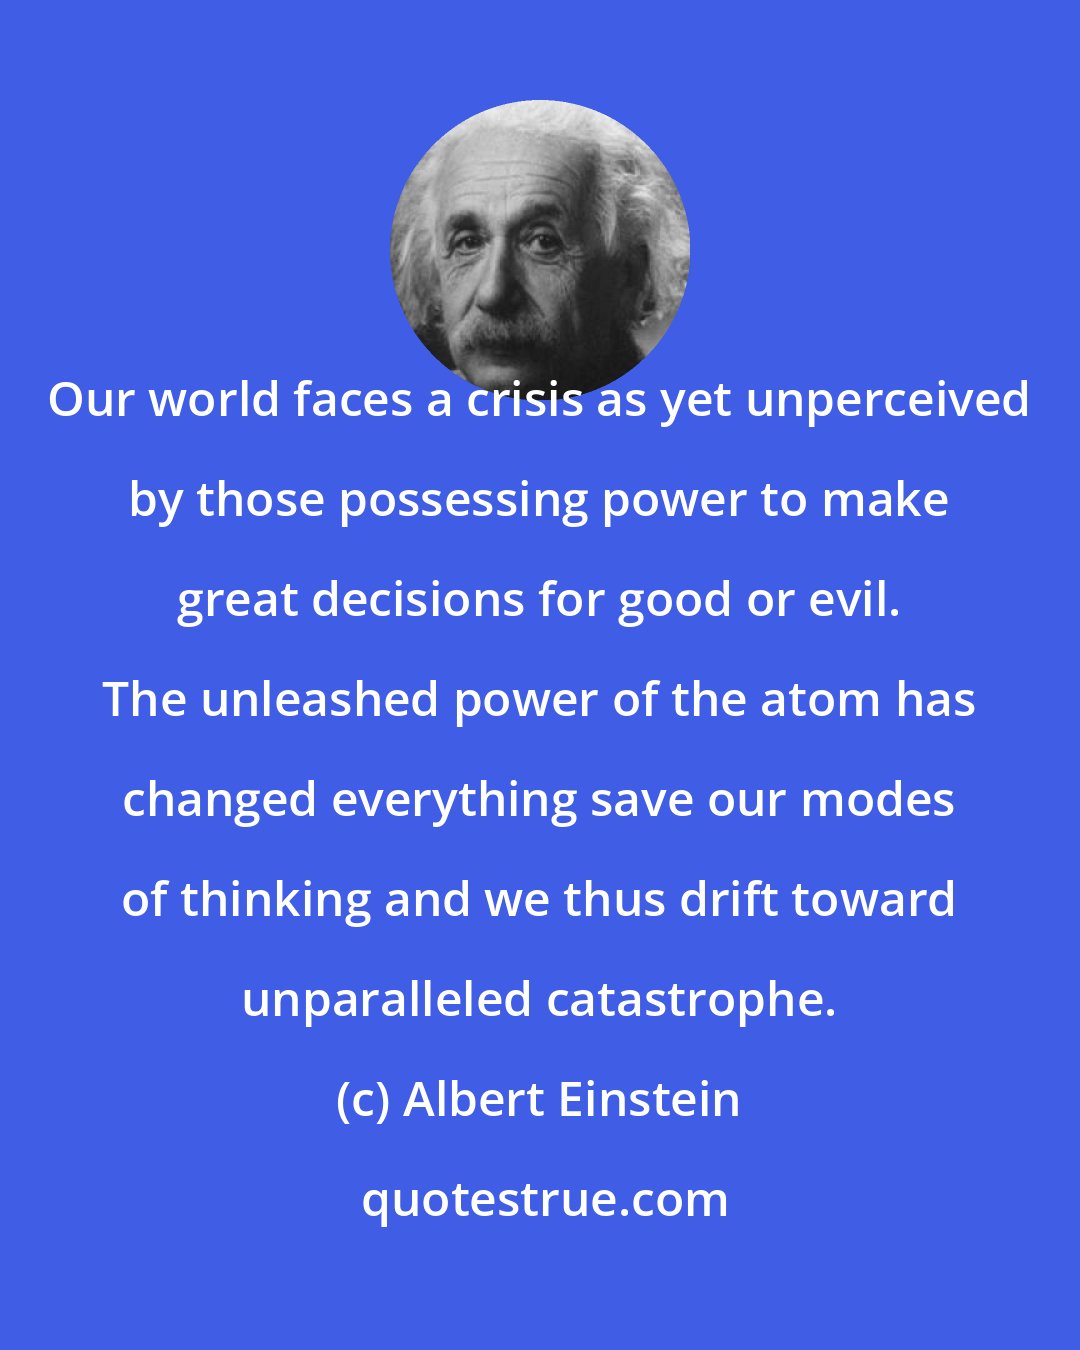 Albert Einstein: Our world faces a crisis as yet unperceived by those possessing power to make great decisions for good or evil. The unleashed power of the atom has changed everything save our modes of thinking and we thus drift toward unparalleled catastrophe.